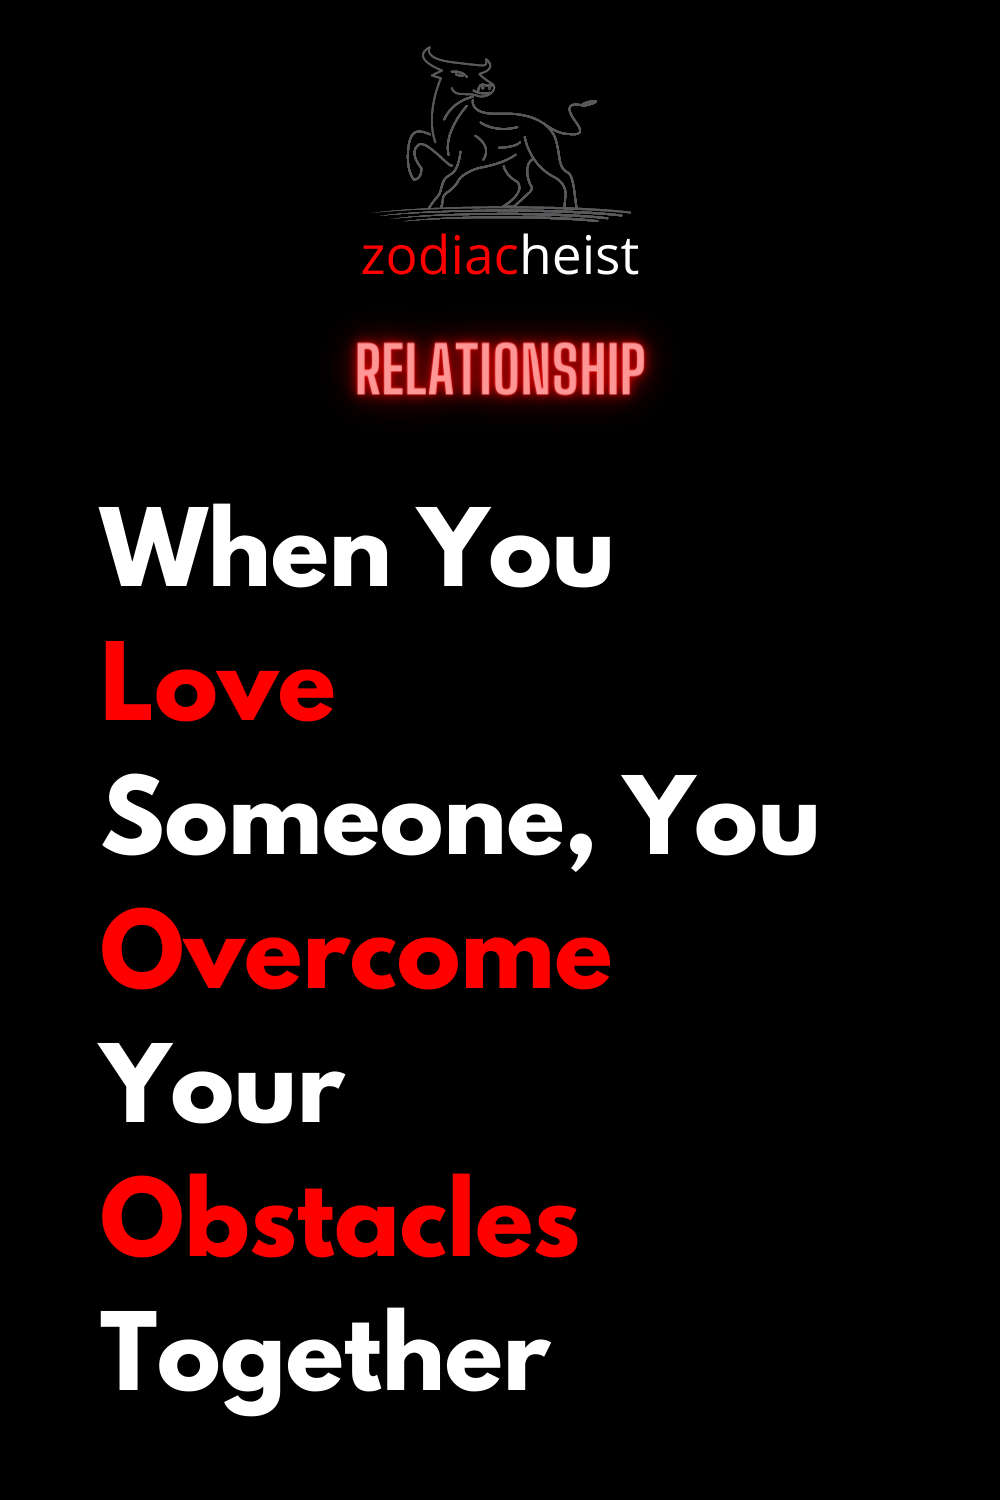 When You Love Someone, You Overcome Your Obstacles Together